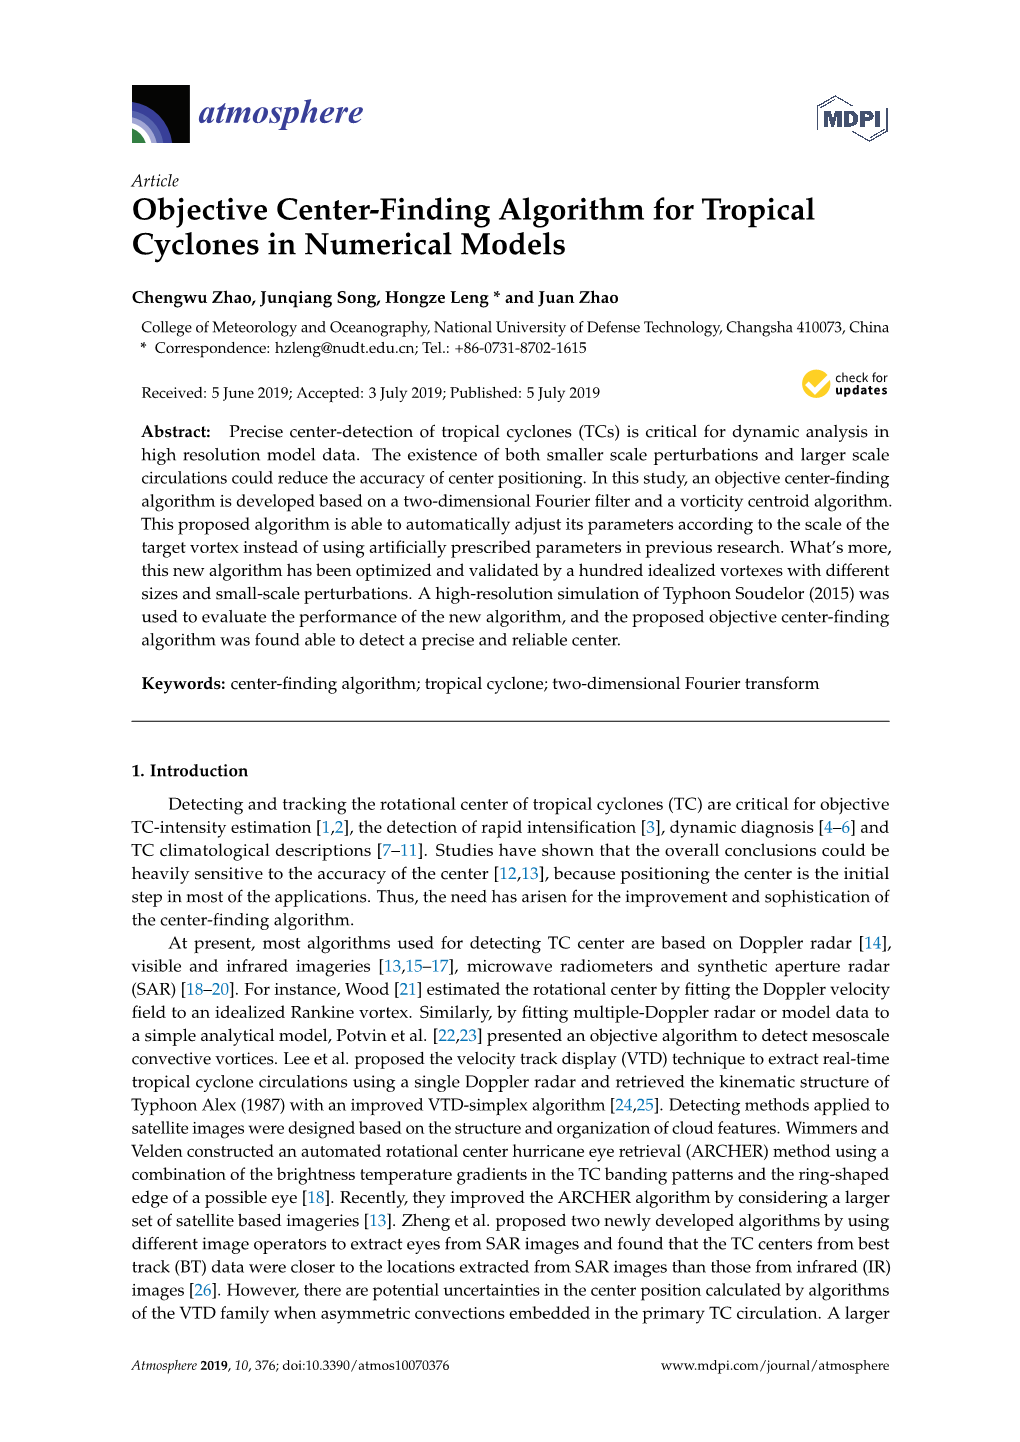 Objective Center-Finding Algorithm for Tropical Cyclones in Numerical Models